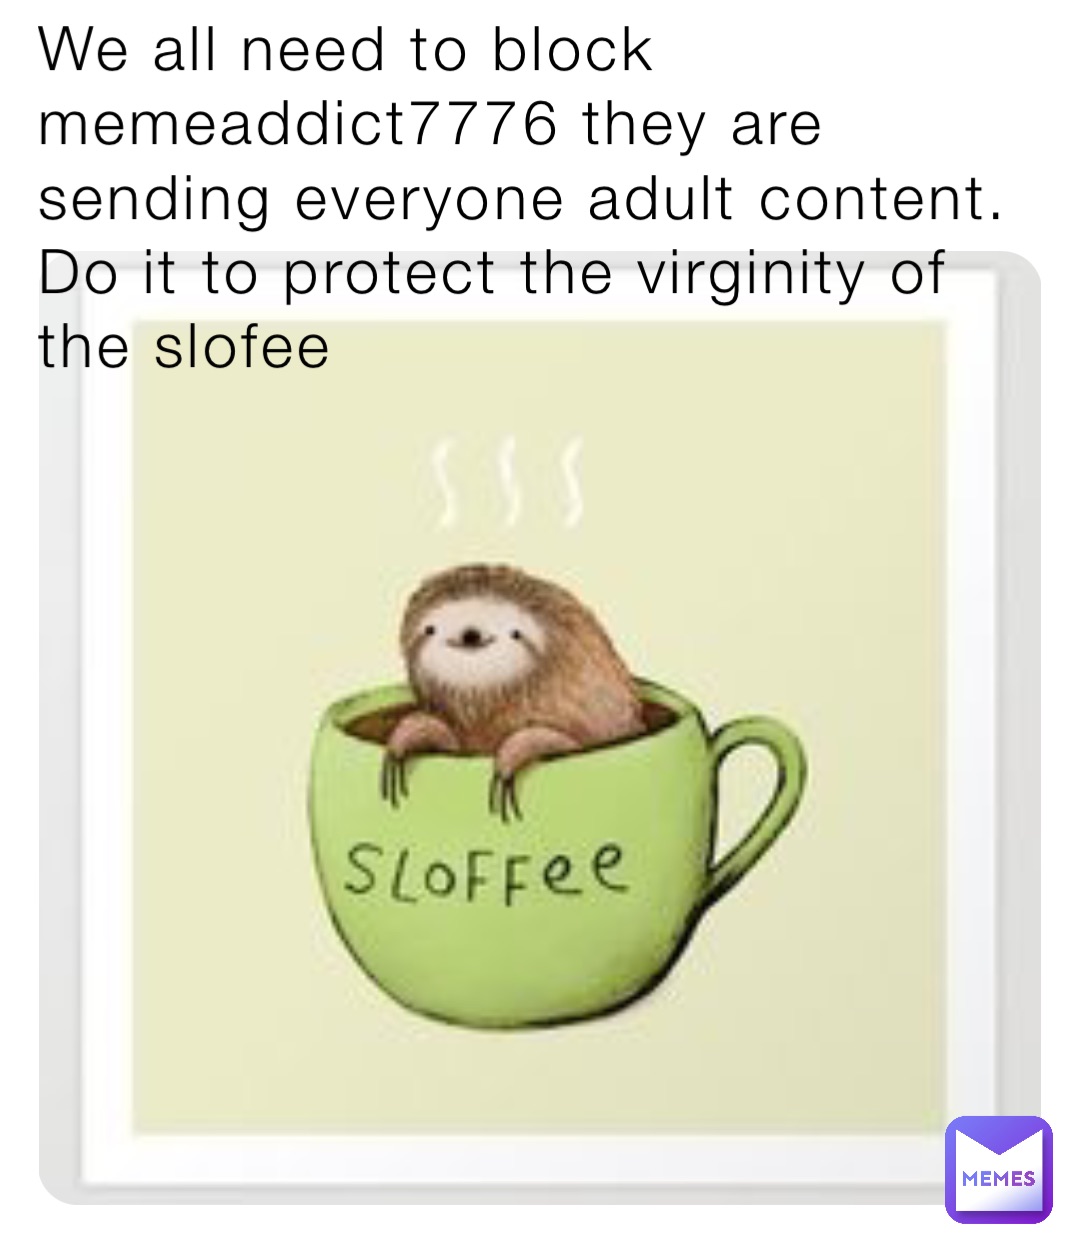 We all need to block memeaddict7776 they are sending everyone adult content. Do it to protect the virginity of the slofee